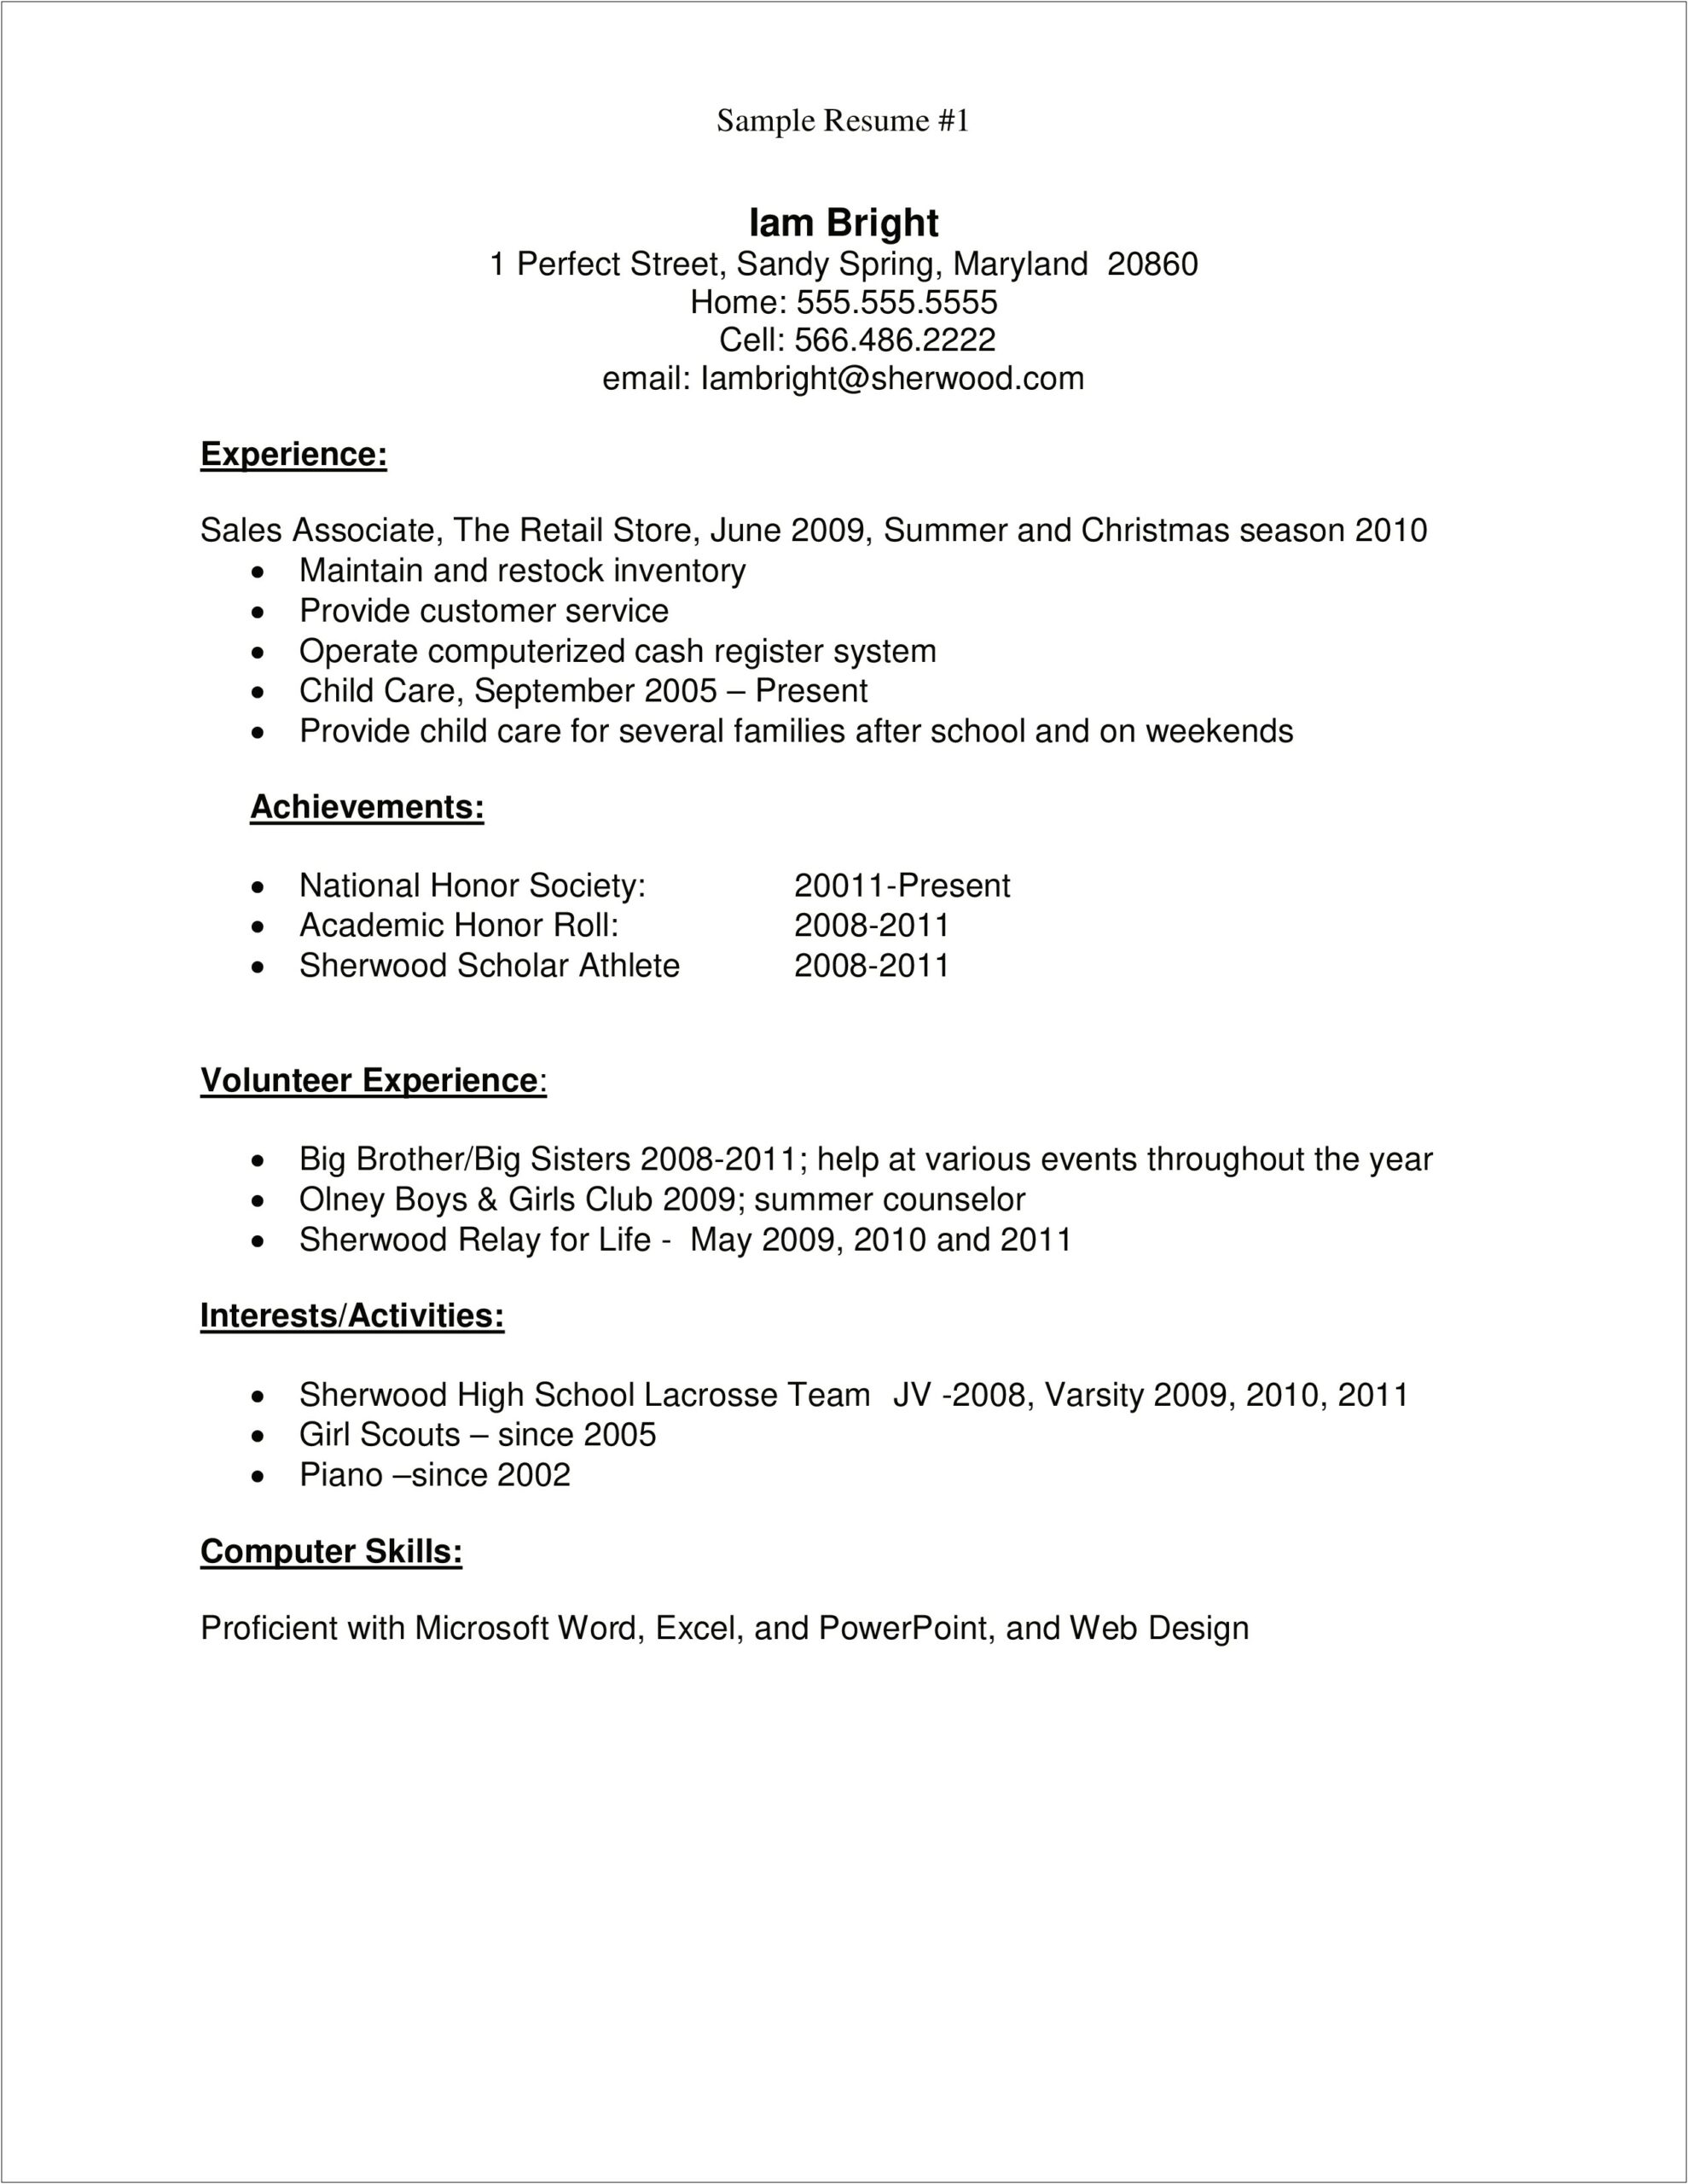 Resume For Teenager Looking For First Job